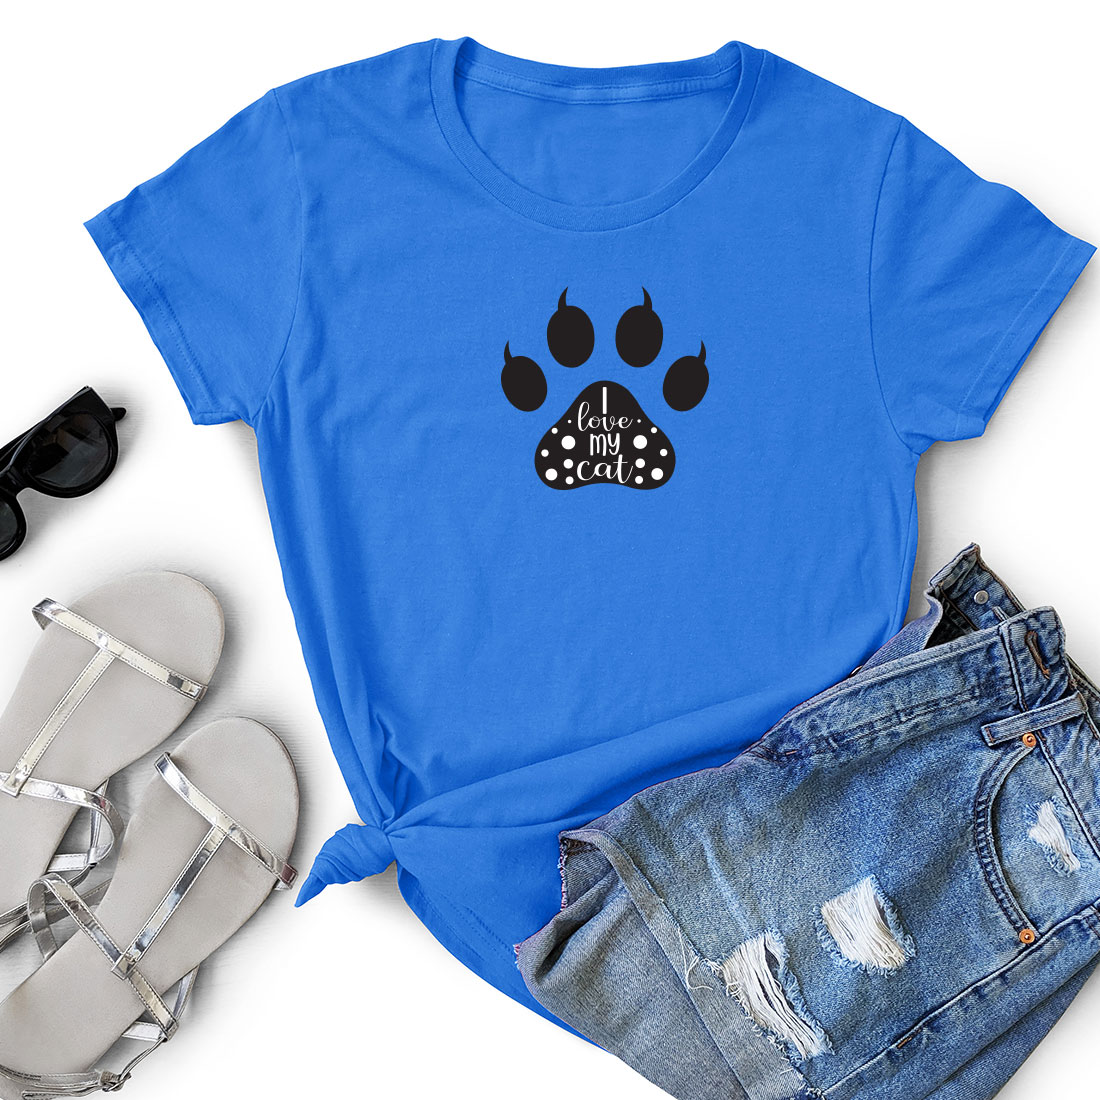 T - shirt with a dog's paw print on it.